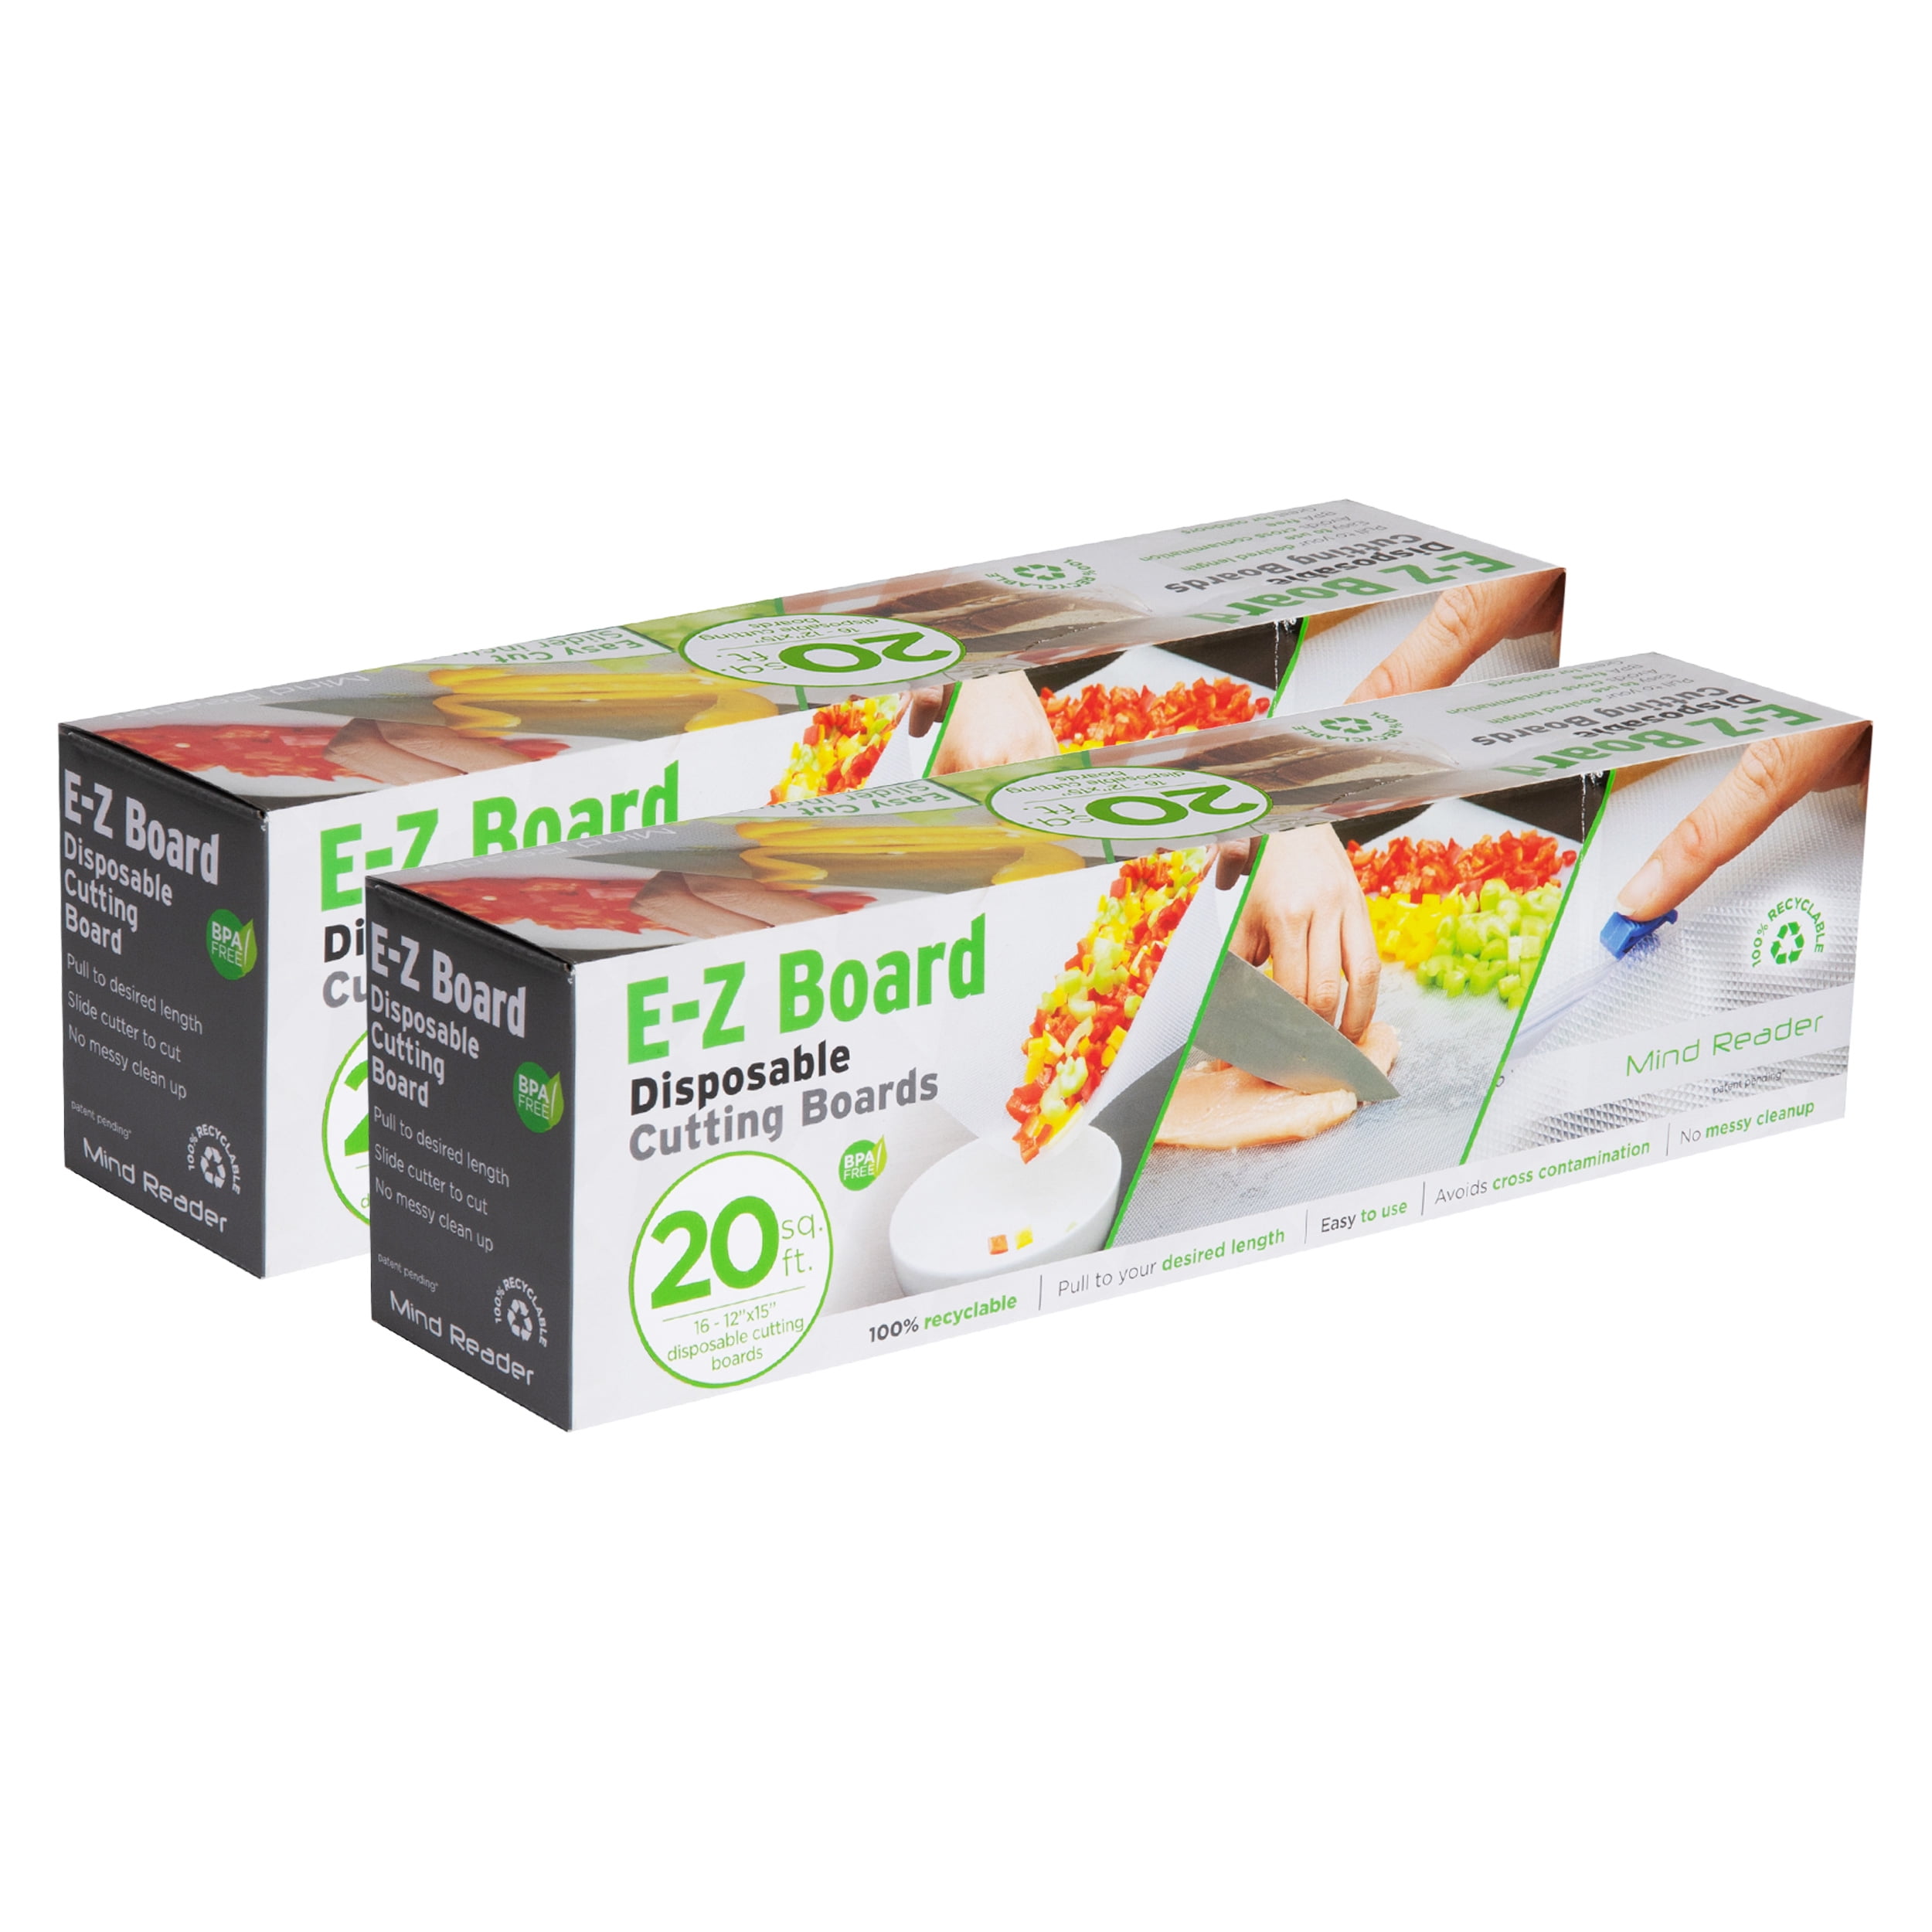 Mind Reader E-Z Board Disposable Cutting Boards, 25 Sq. ft., Clear